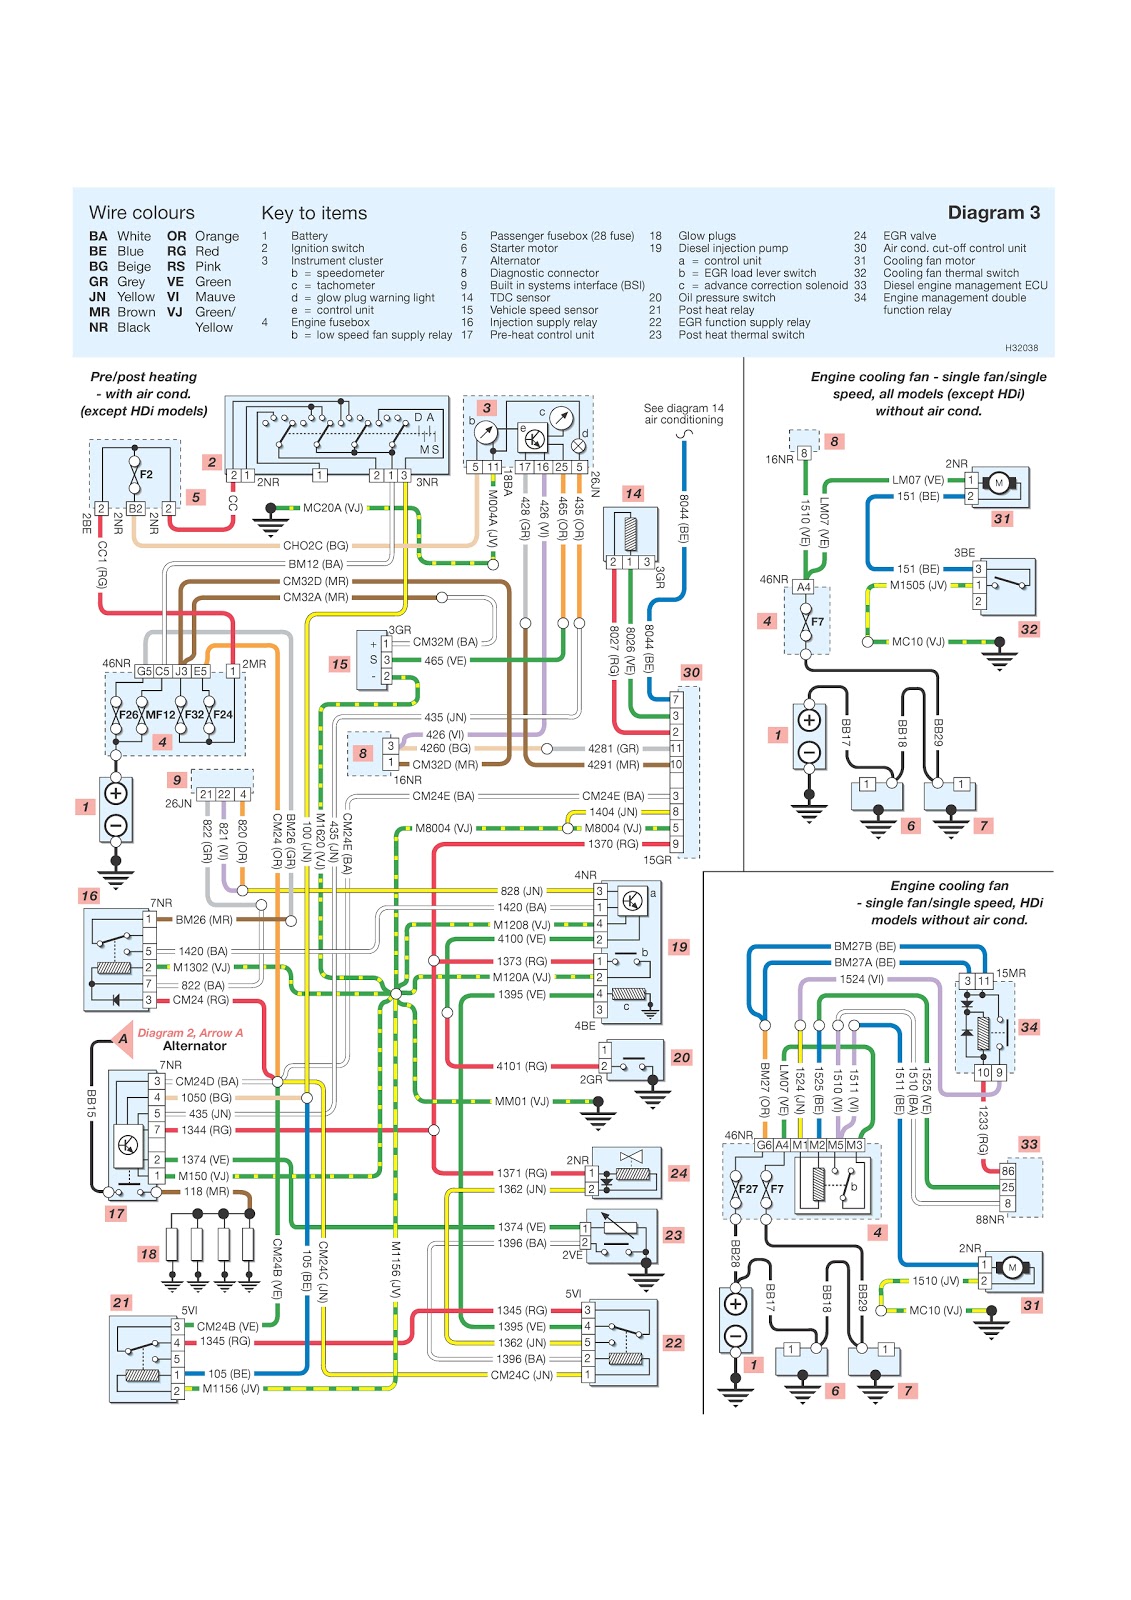 luxaire wiring diagram